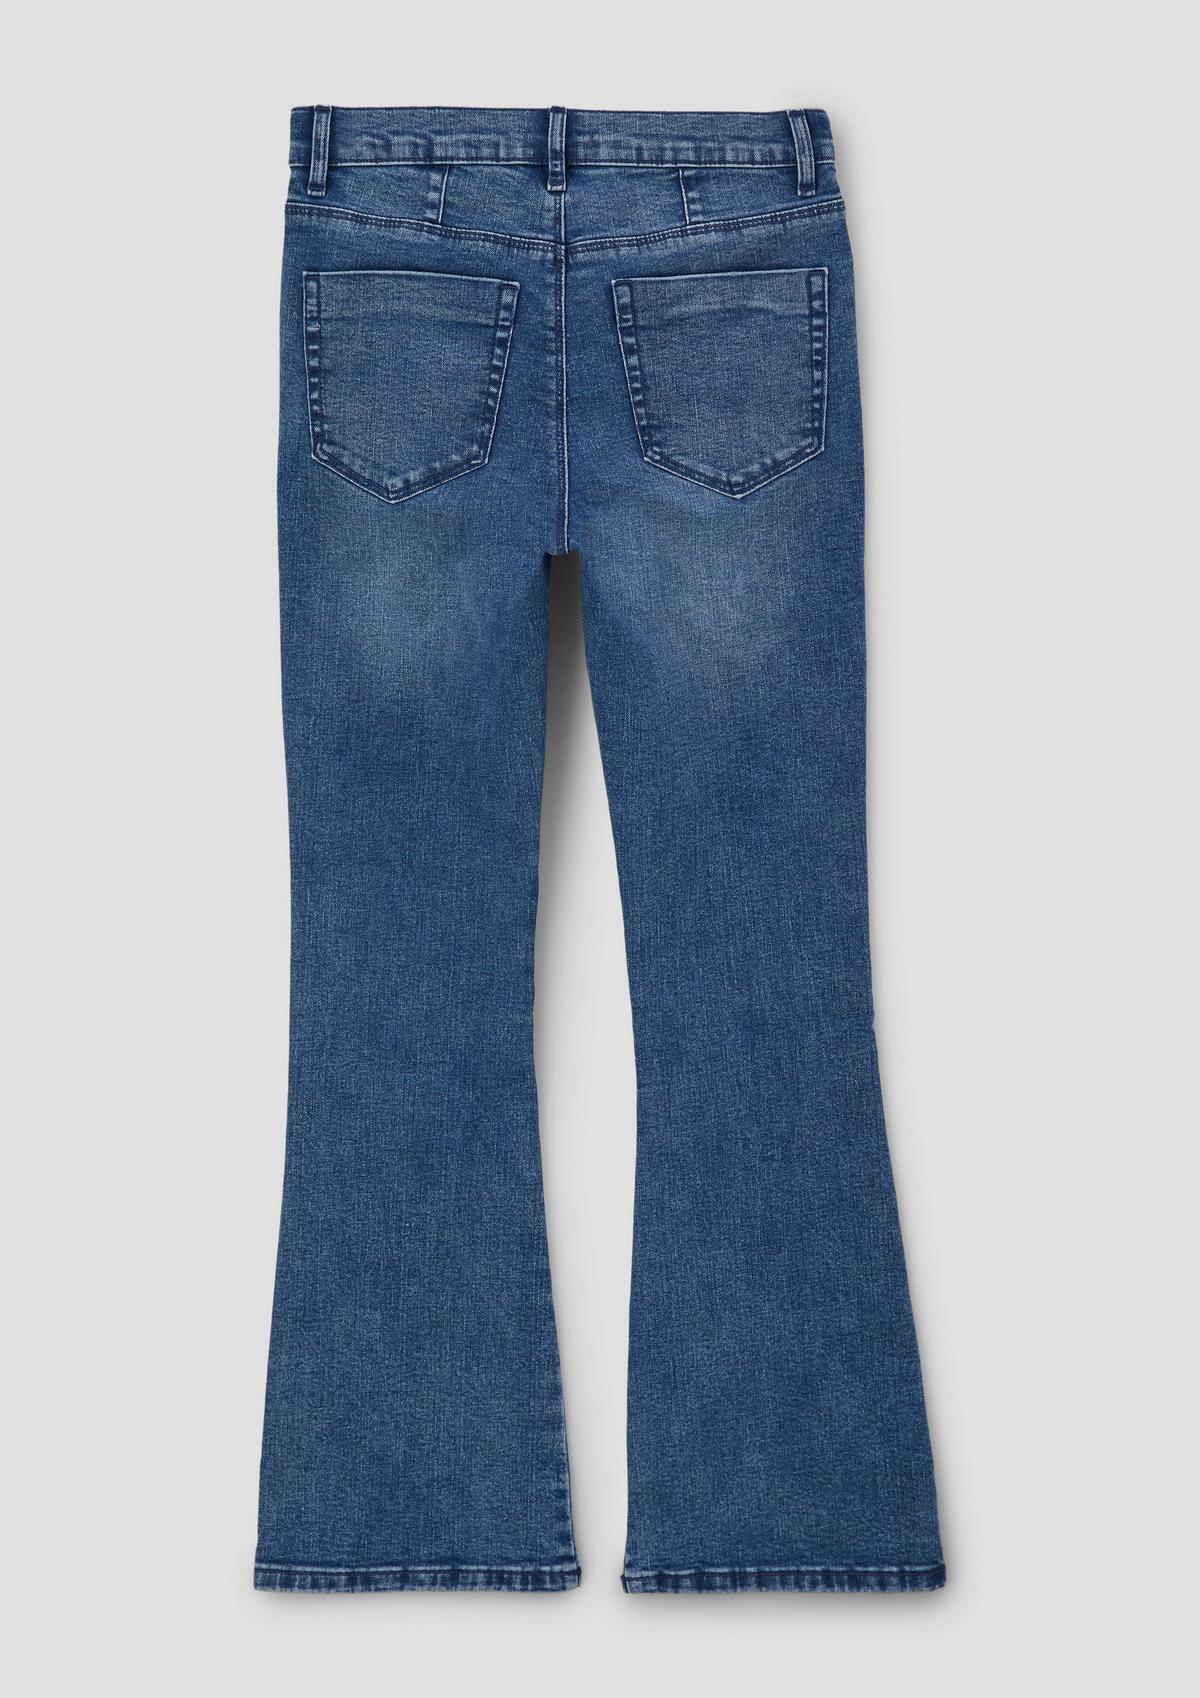 s.Oliver Jeans Beverly / relaxed fit / high rise / flared leg / in de wijdte verstelbaar